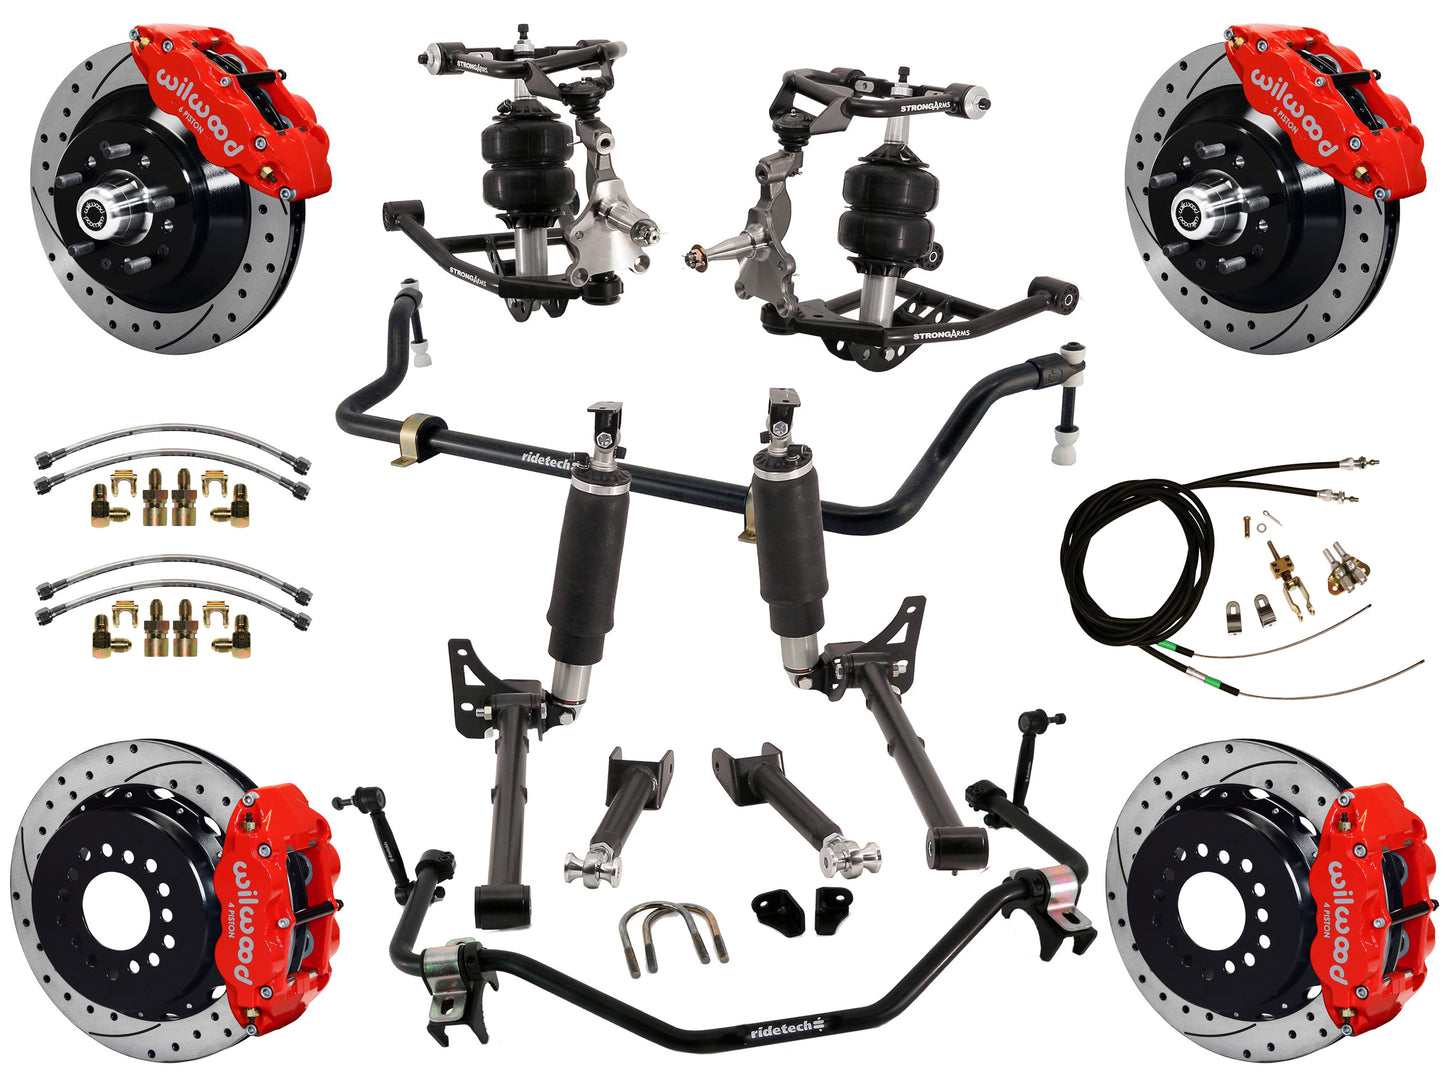 AIR RIDE SYSTEM,ARMS,BARS,WILWOOD 13" DRILLED BRAKES,RED CALIPERS,64-67 GM A-